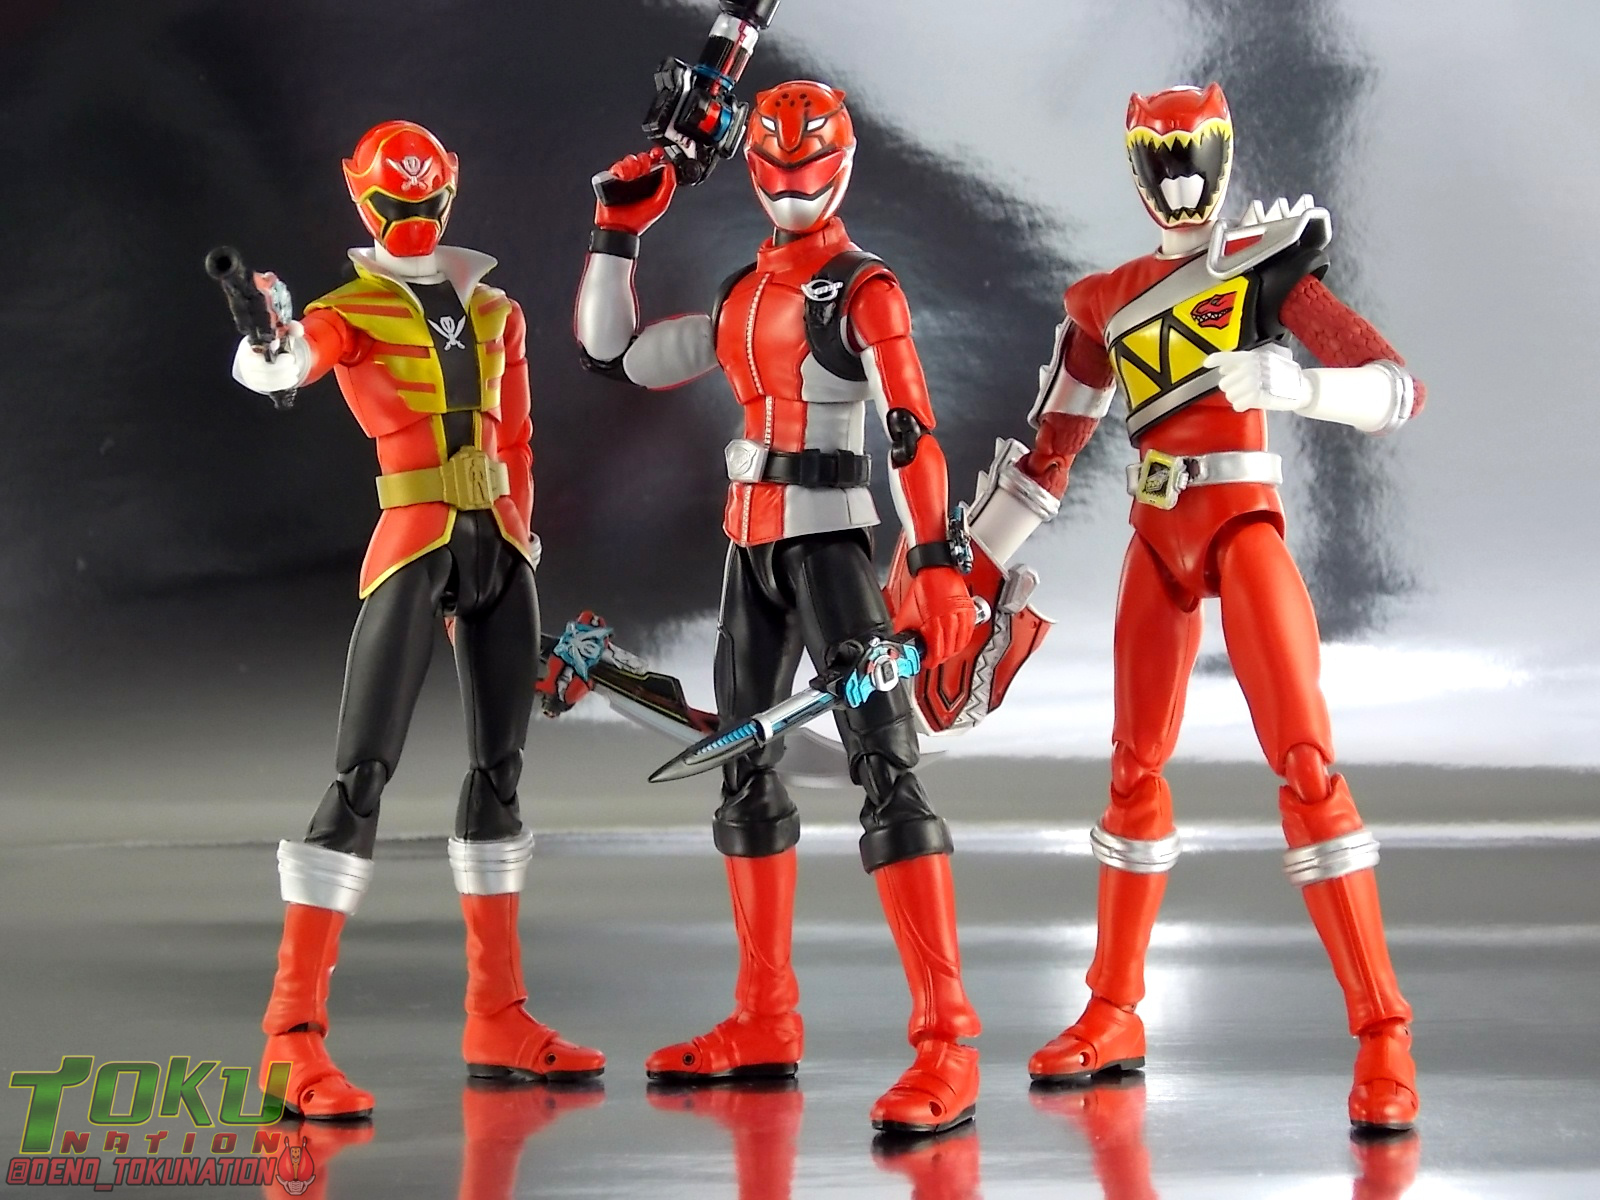 Bandai S.H Figuarts Tokumei Sentai Go-Busters Red Buster Action Figure